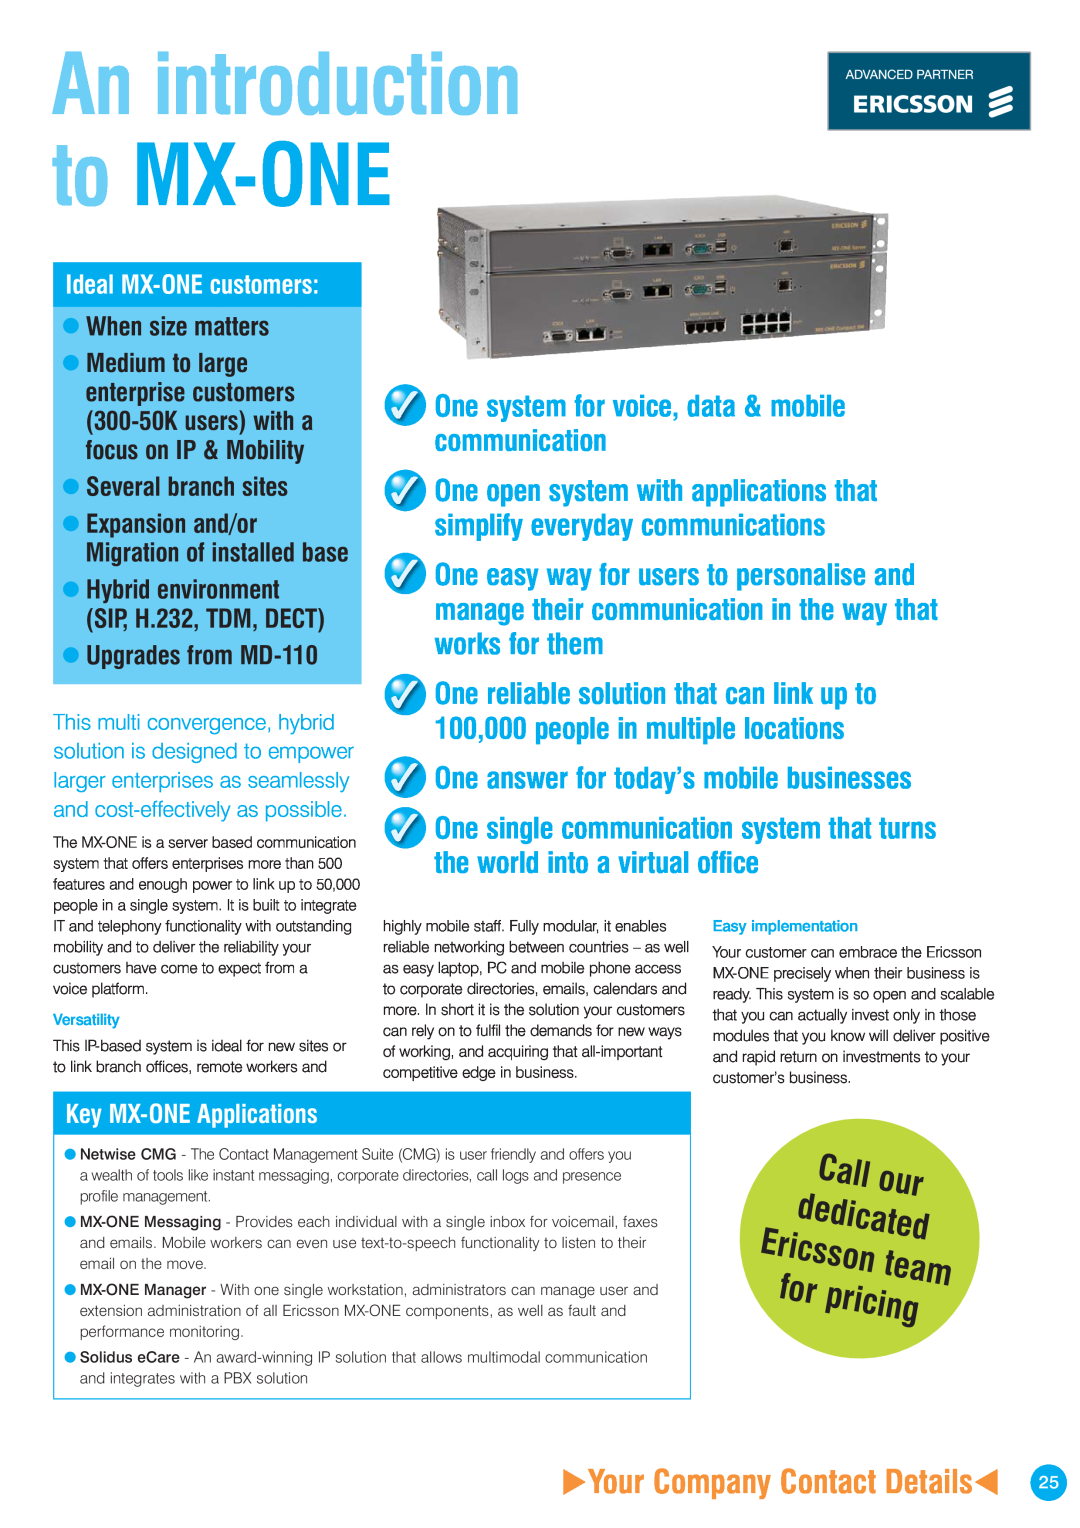 Ericsson ISDN2 manual Call our dedicated Ericsson team for pricing, An introduction to MX-ONE, Your Company Contact Details 